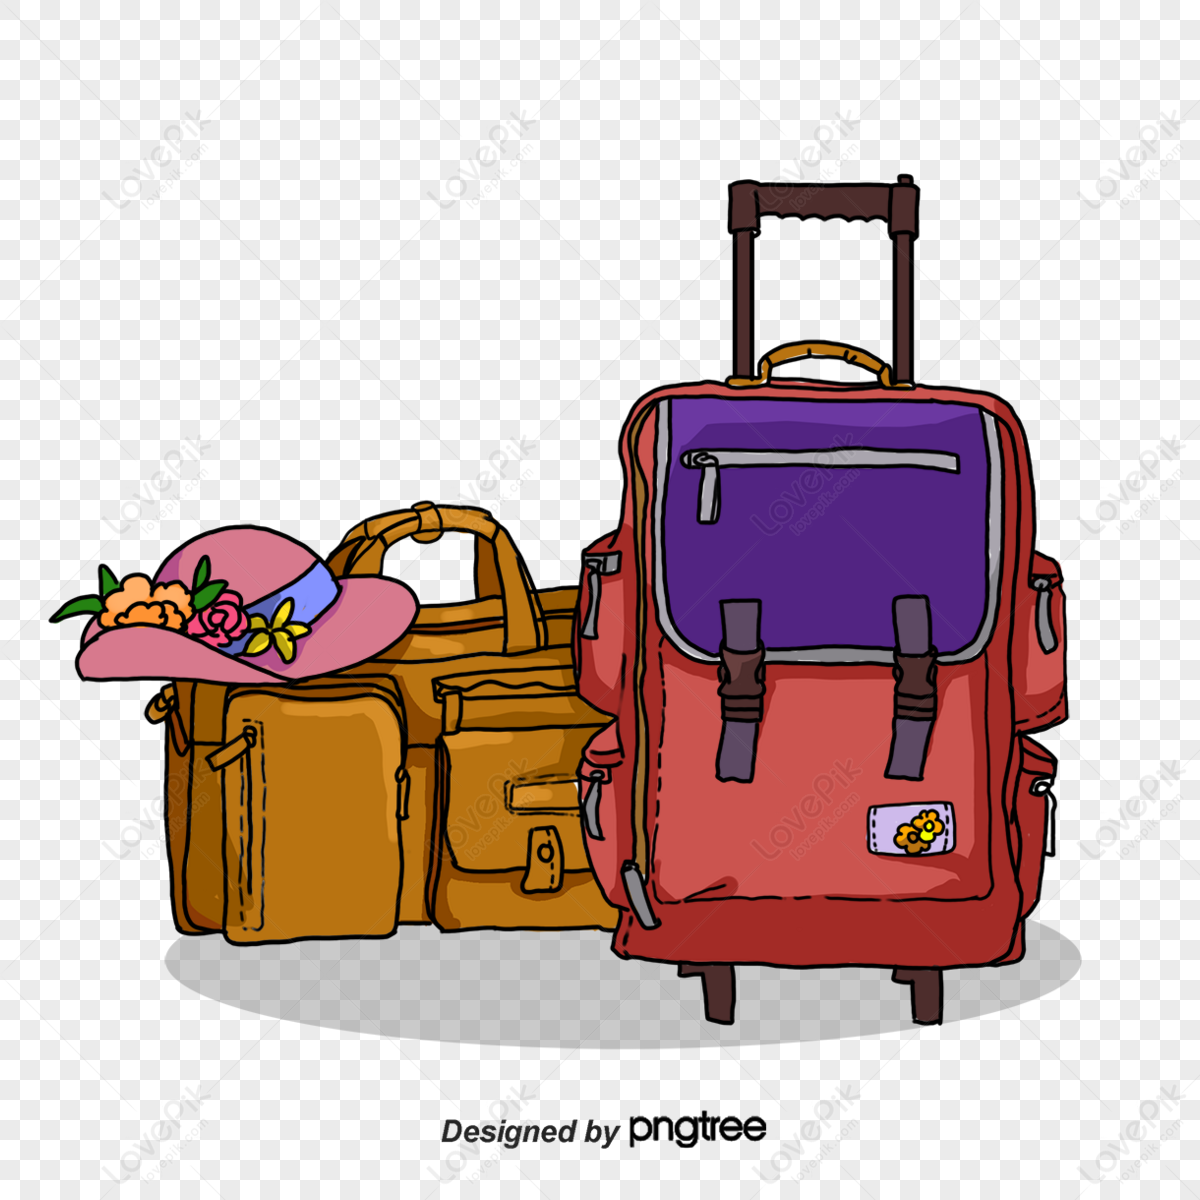 cartoon travel luggage,collections,hand,travel bag png white transparent